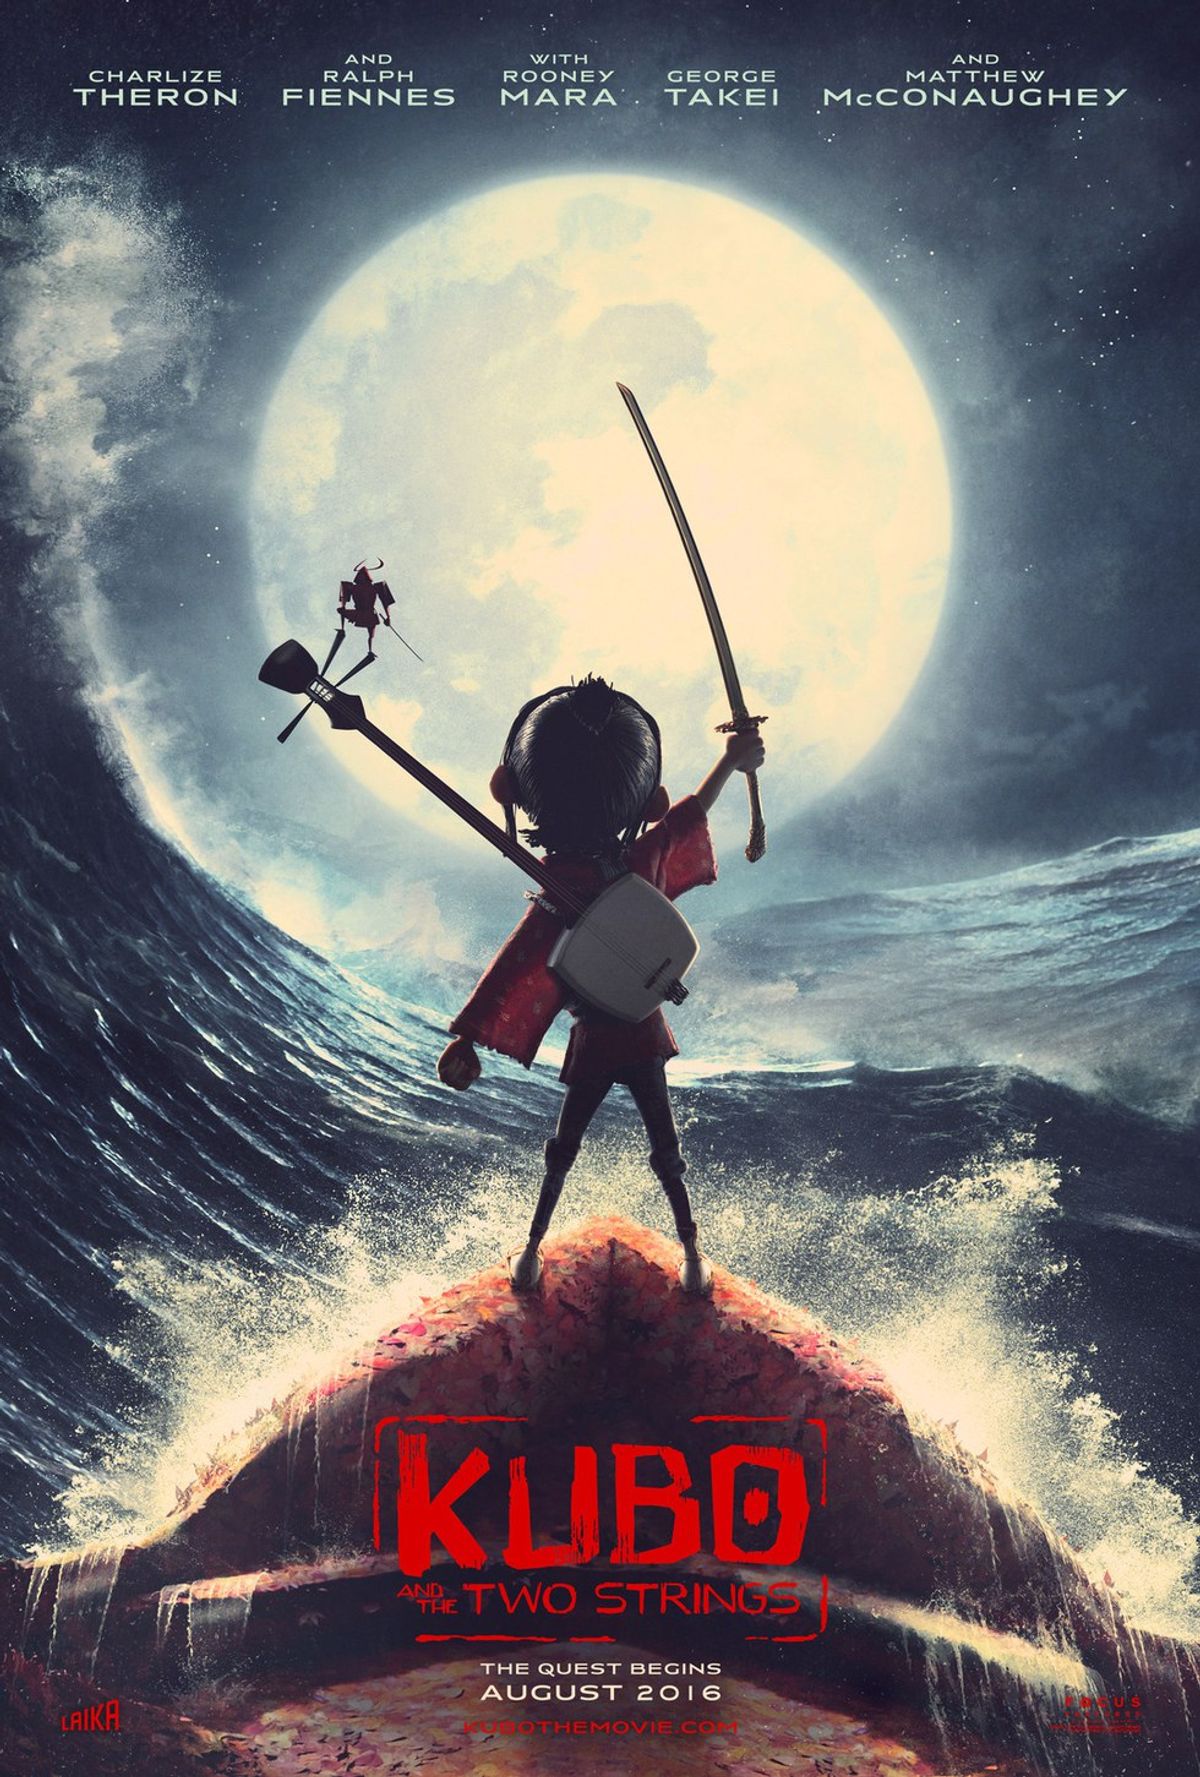 Kubo and the Two Strings: Another Classic for Laika